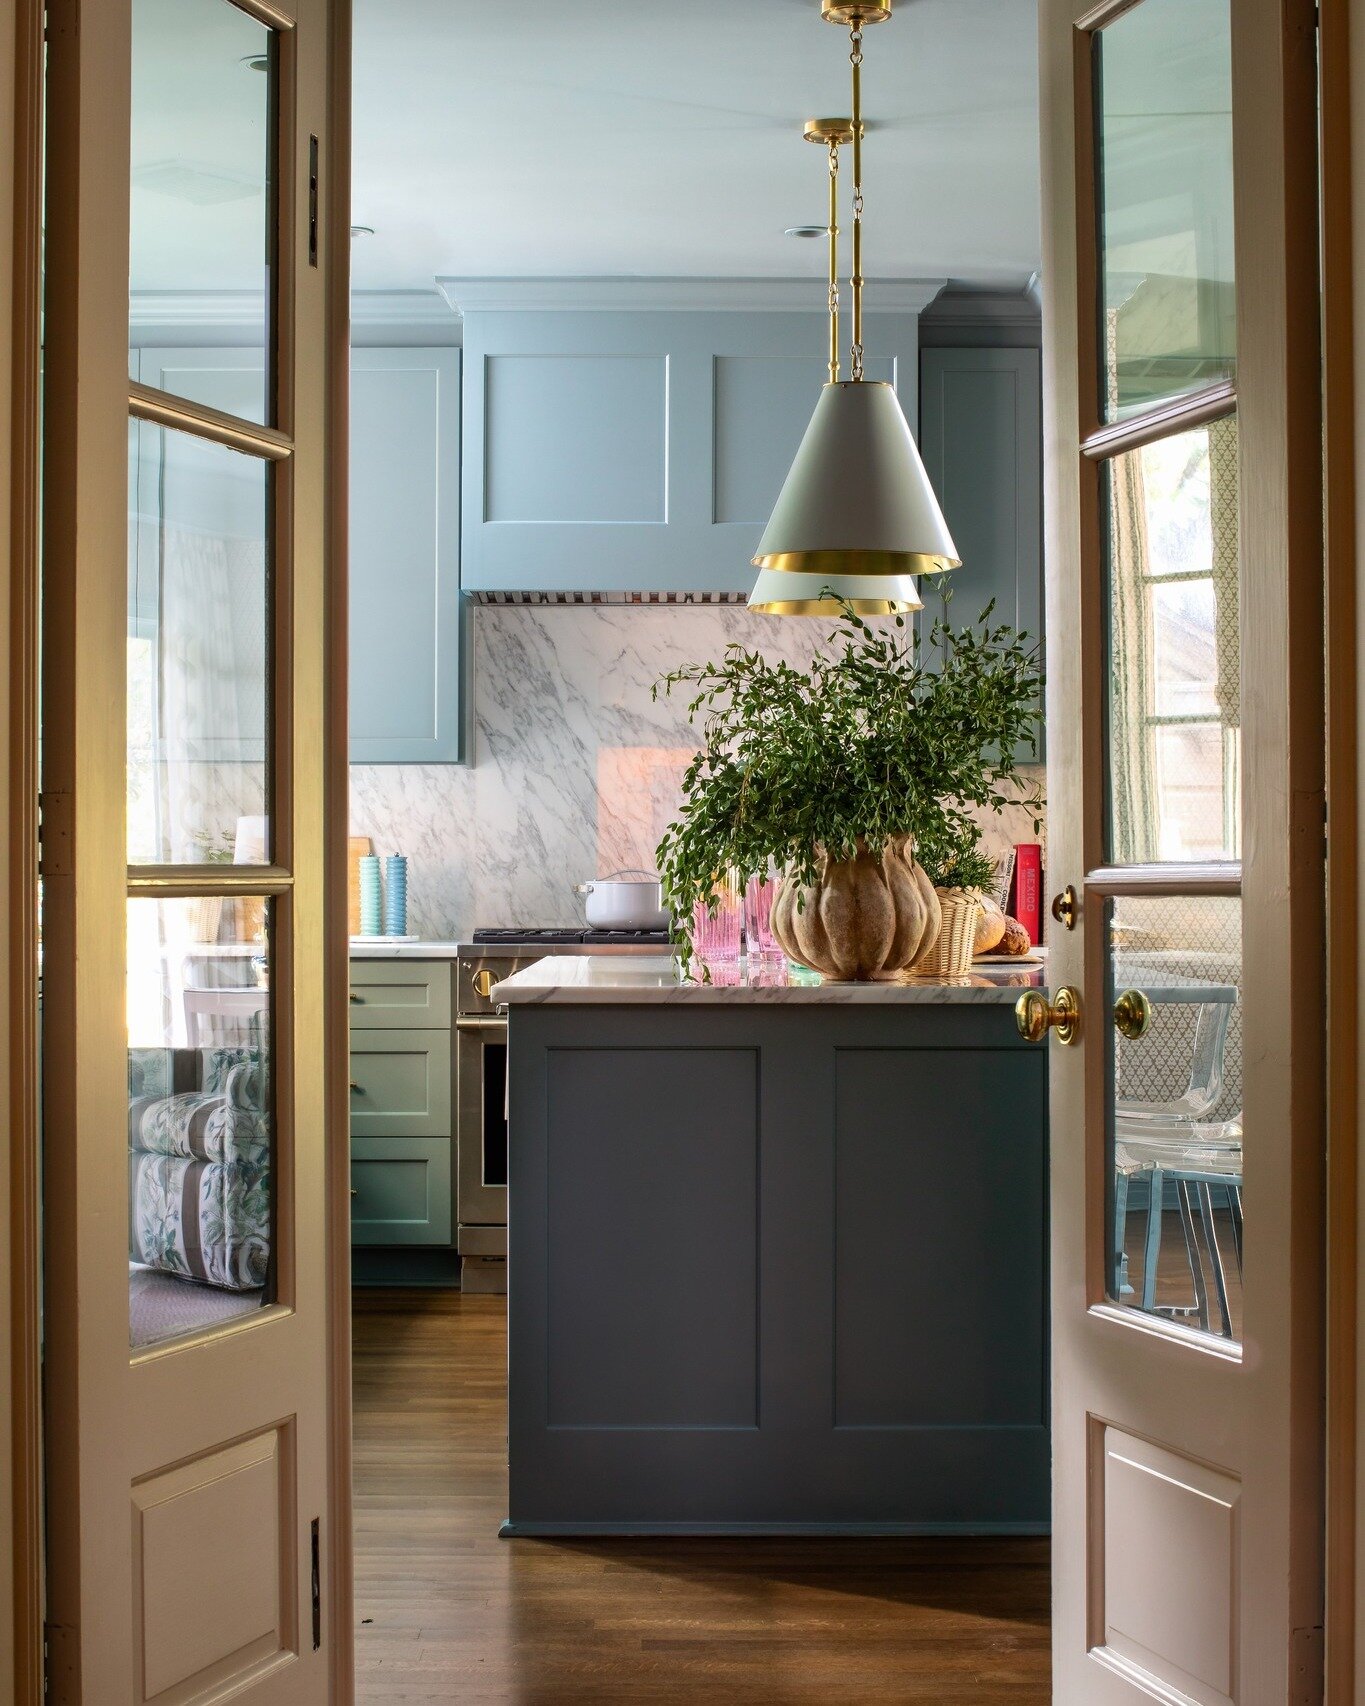 This doorway frames the renovated kitchen interior so perfectly, really highlighting those blue cabinets and making for the kind of gasp-worthy entrance we adore for our clients.

. . .

#homerenovationideas #homerenovationproject #homerenoideas #sat